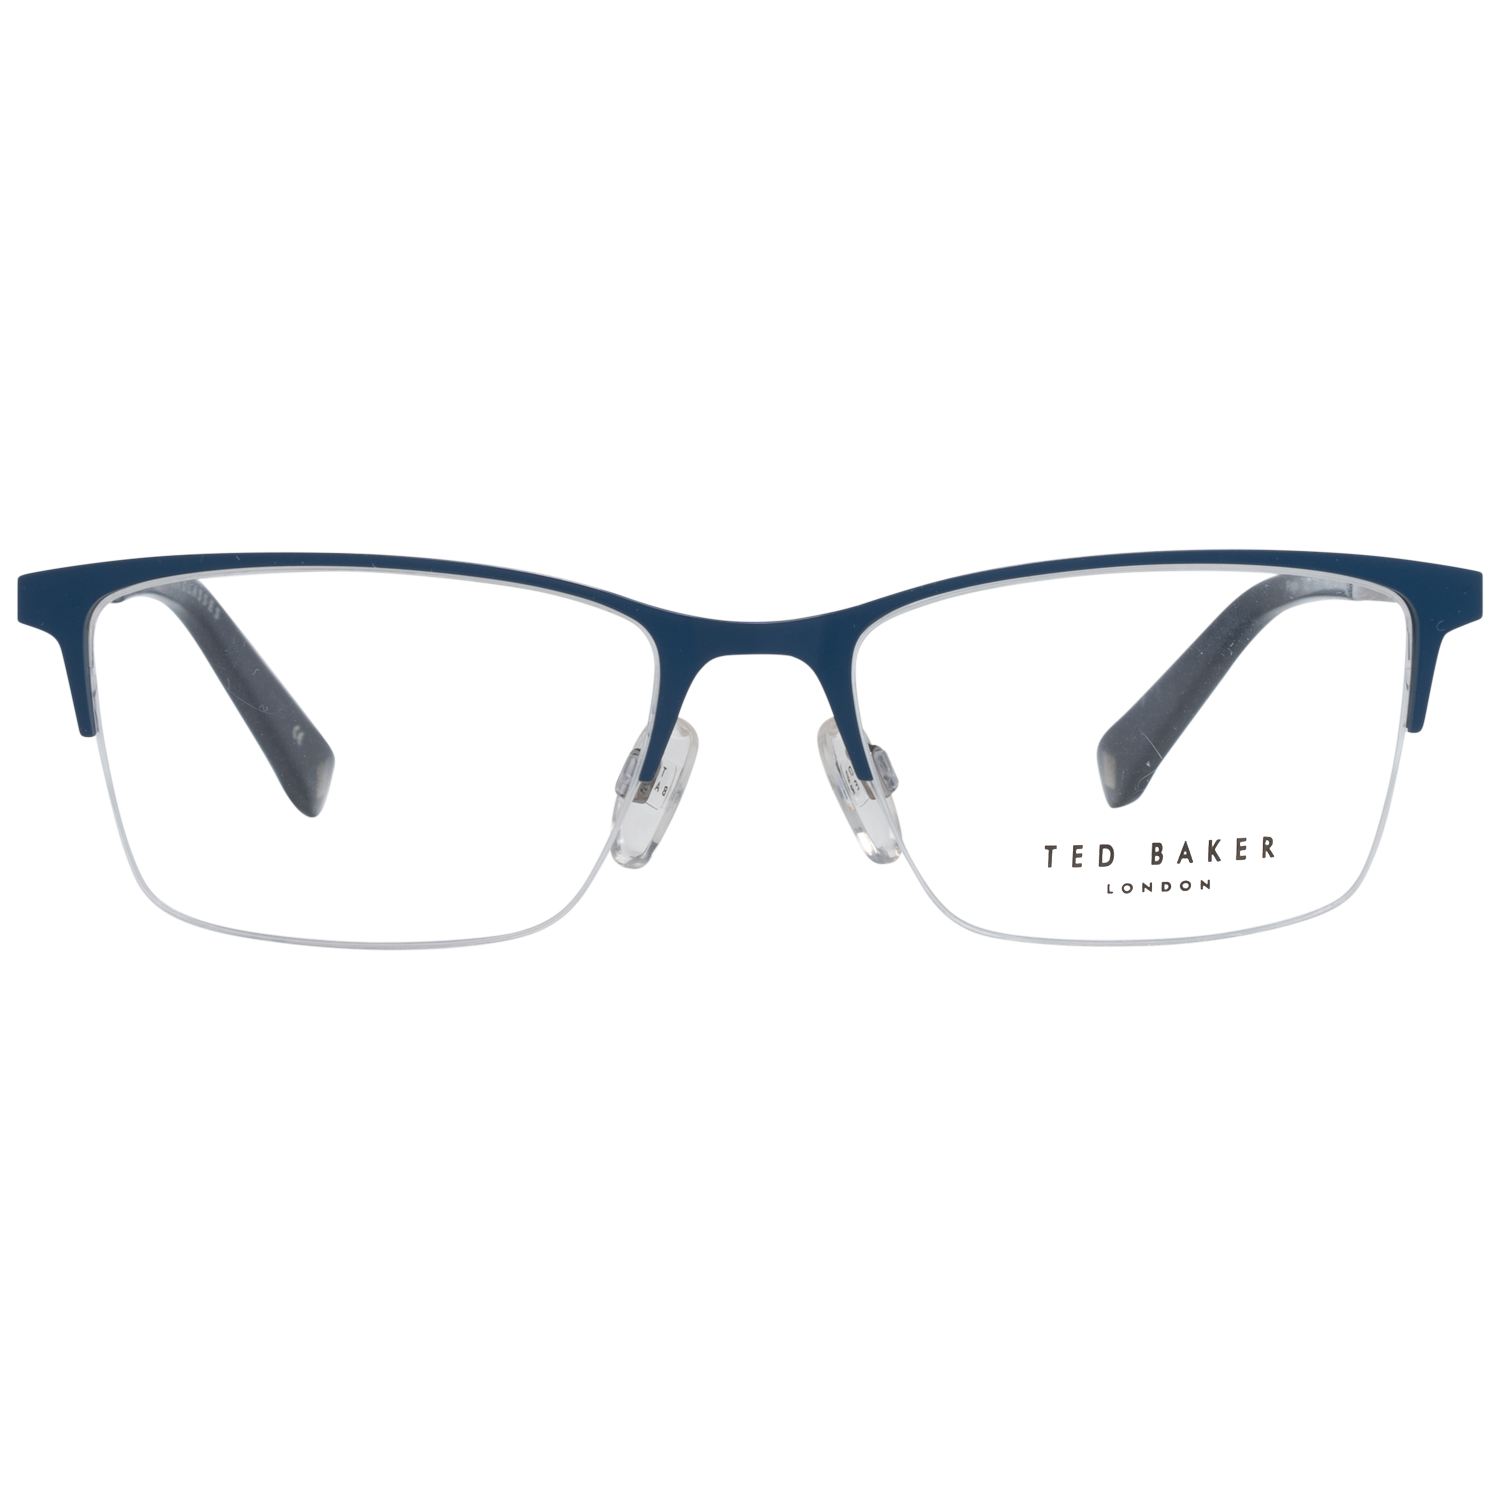 GenderMenMain colorBlueFrame colorBlueFrame materialMetalSize52-17-145Lenses width52mmLenses heigth35mmBridge length17mmFrame width134mmTemple length145mmShipment includesCase, Cleaning clothStyleHalf-RimSpring hingeYes